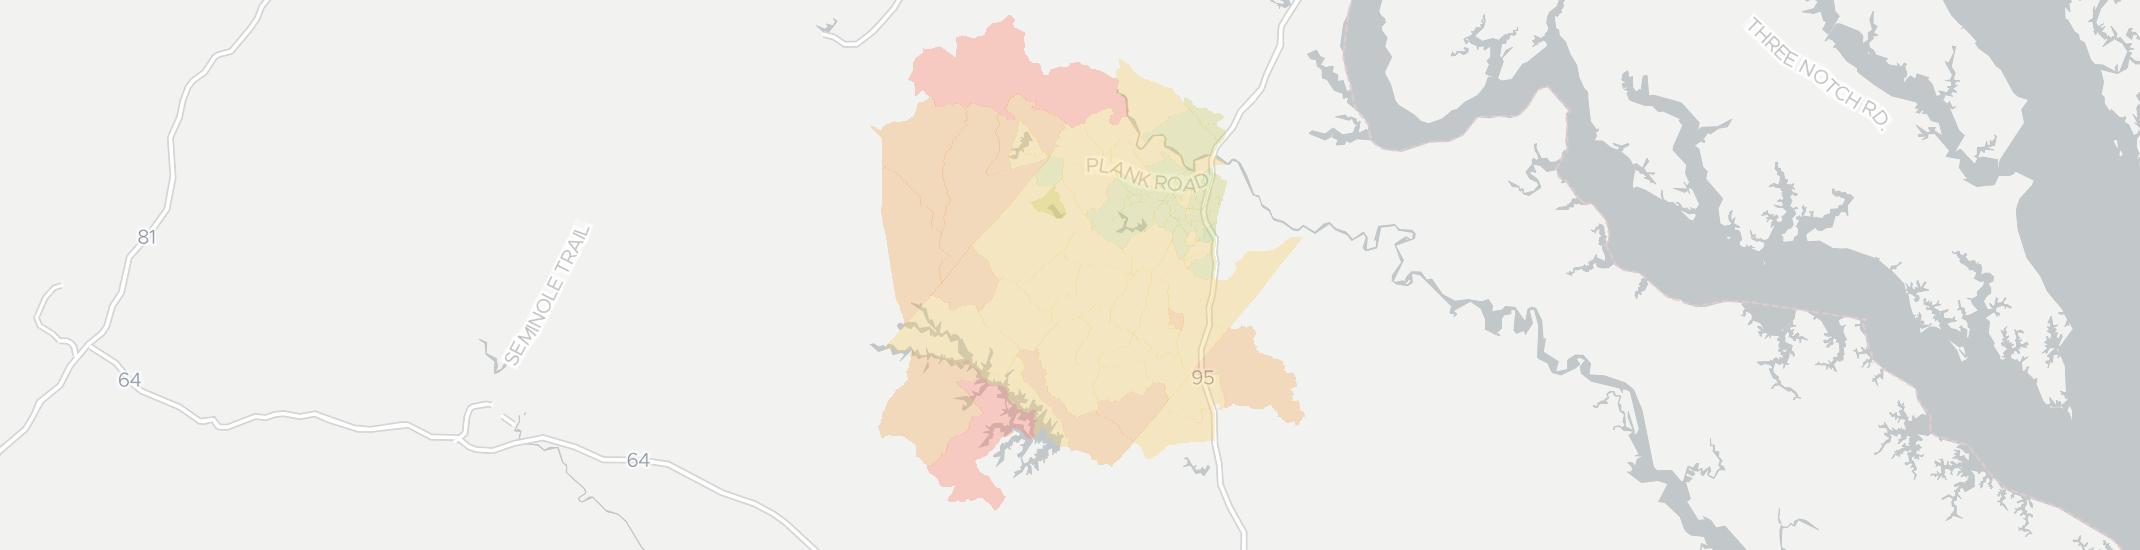 Spotsylvania Internet Competition Map. Click for interactive map